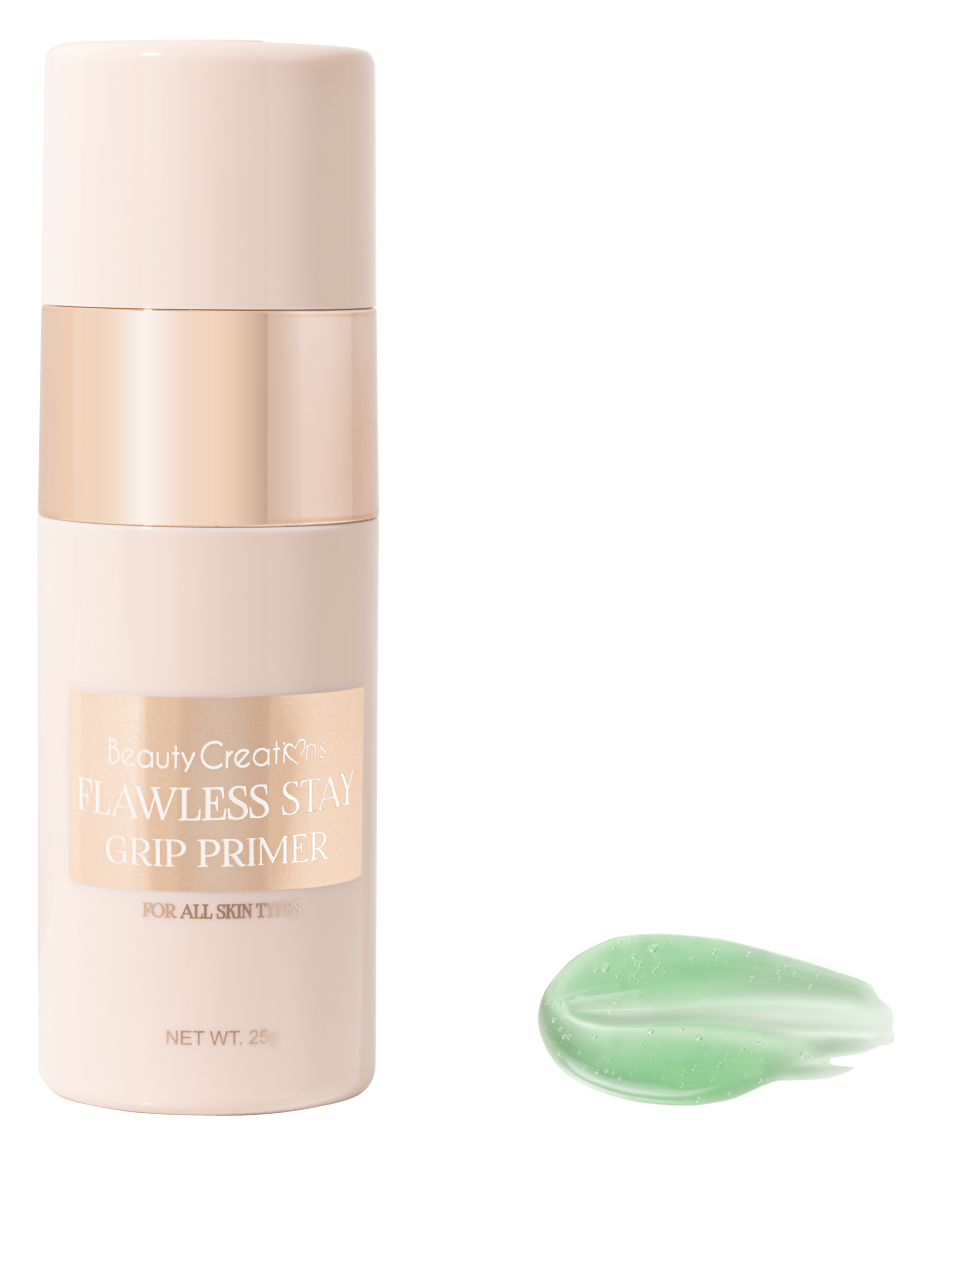 FLAWLESS STAY GRIP PRIMER - BEAUTY CREATIONS